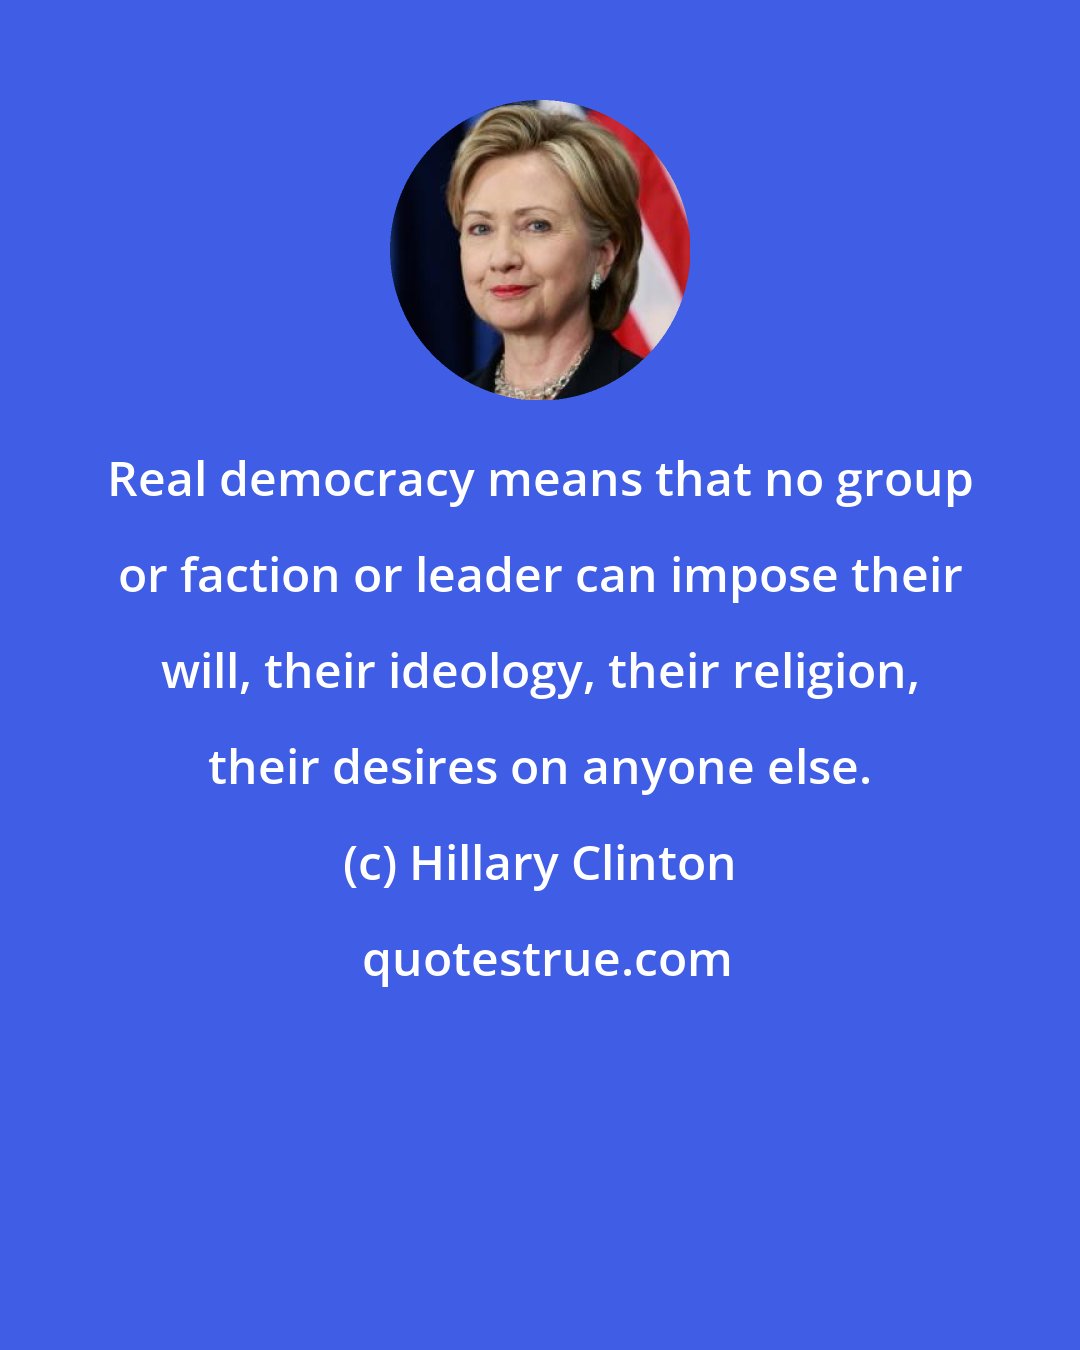 Hillary Clinton: Real democracy means that no group or faction or leader can impose their will, their ideology, their religion, their desires on anyone else.